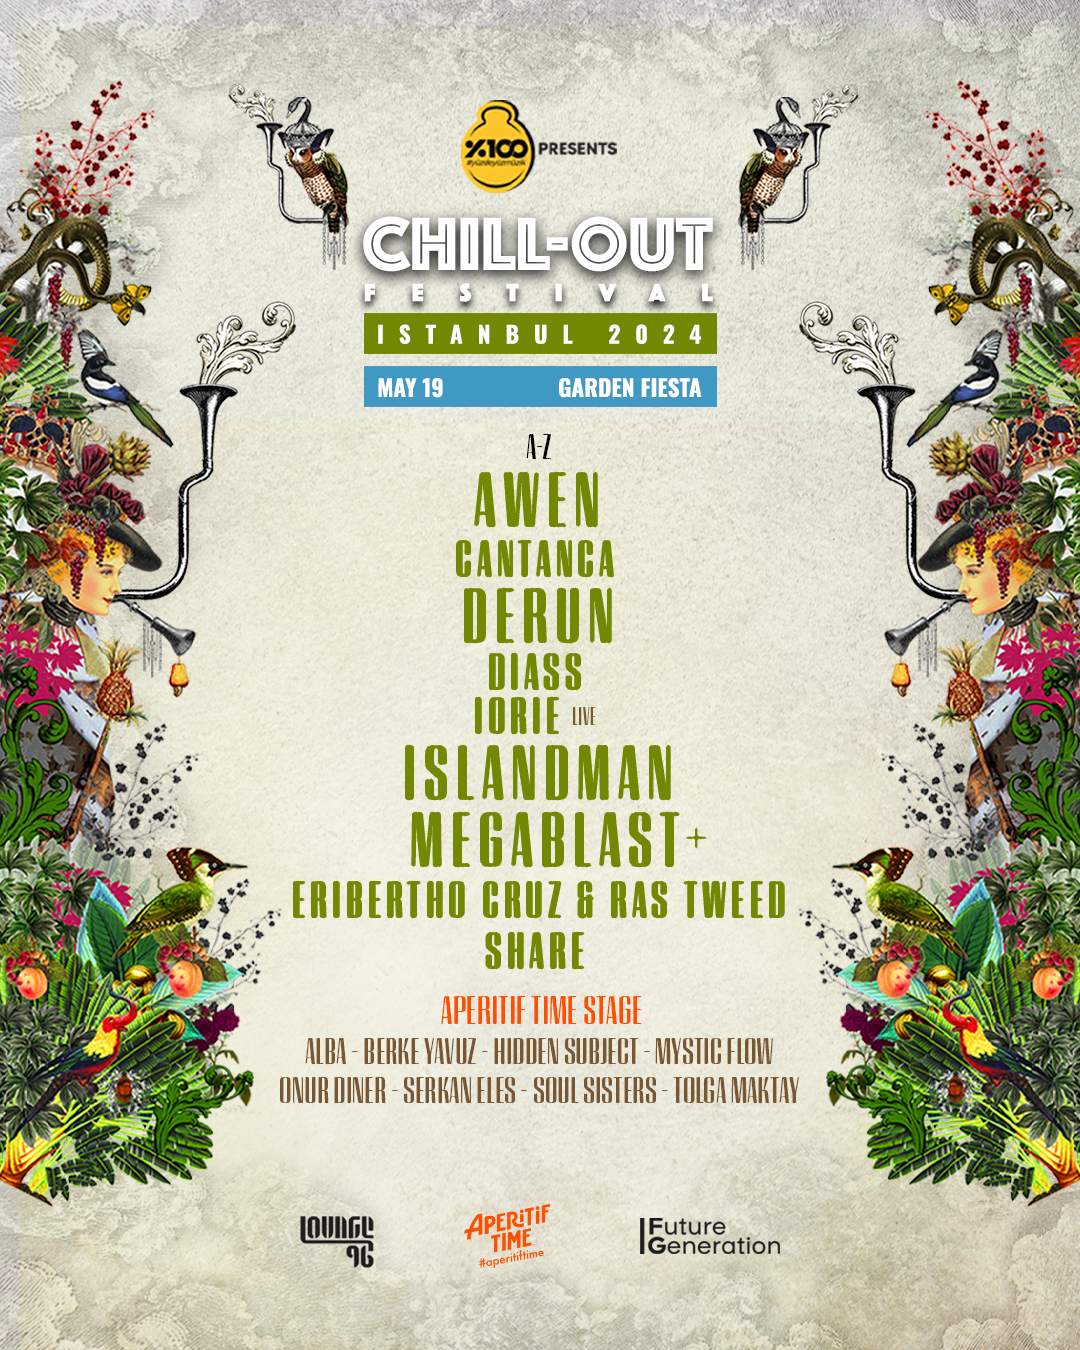 Chill-Out Festival Istanbul 2024 - フライヤー裏